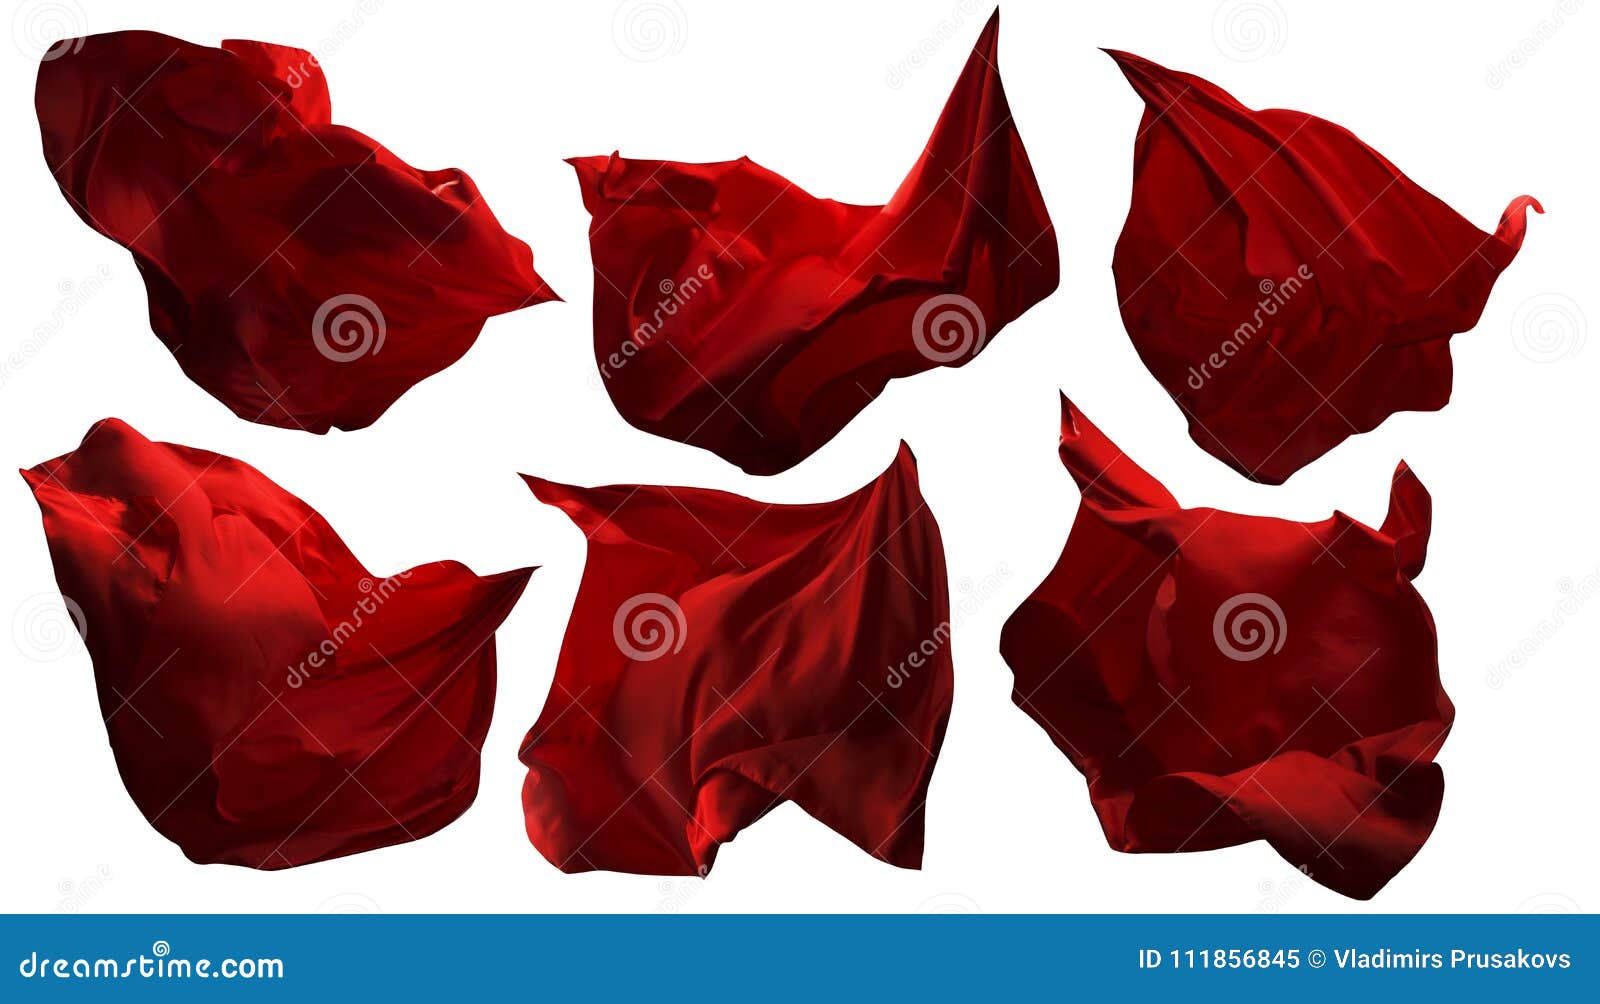 red flying fabric pieces, flowing waving cloth, shine satin